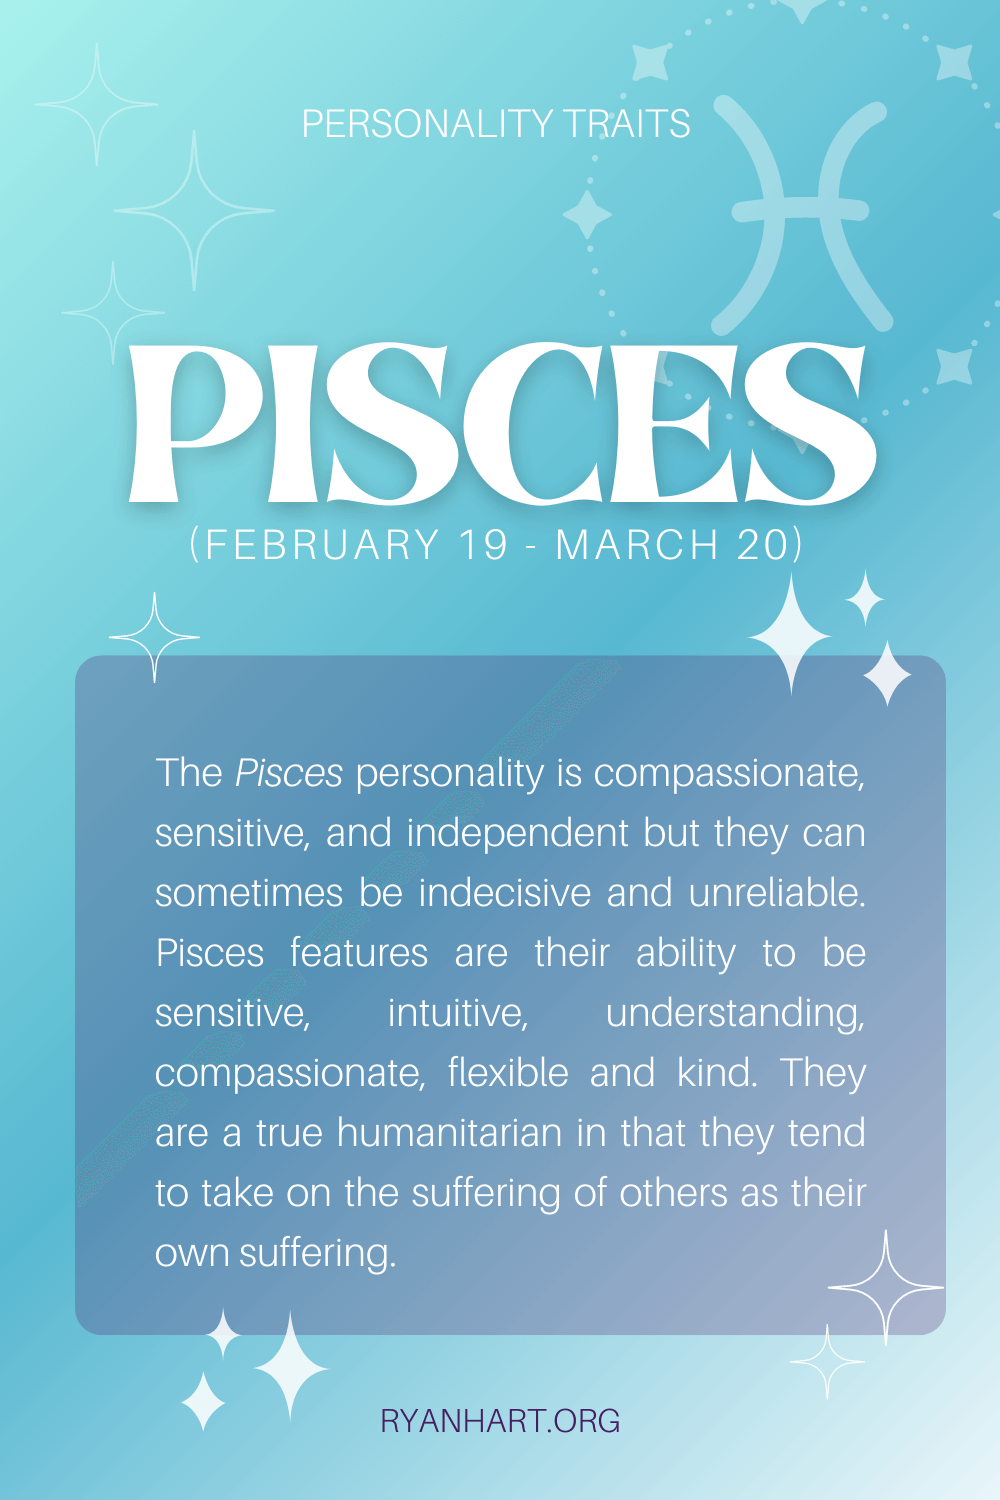 Pisces Personality Traits (Dates: February 19 - March 20) | Ryan Hart